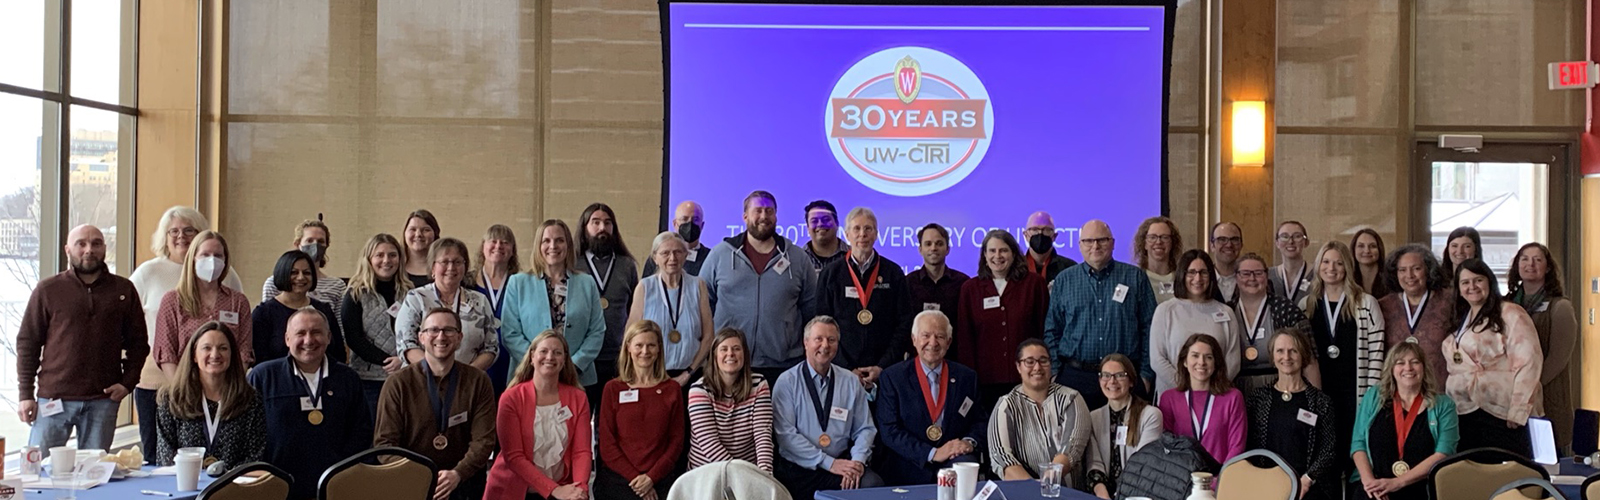 Last spring, Fiore celebrated 30 years of UW-CTRI with fellow colleagues. 